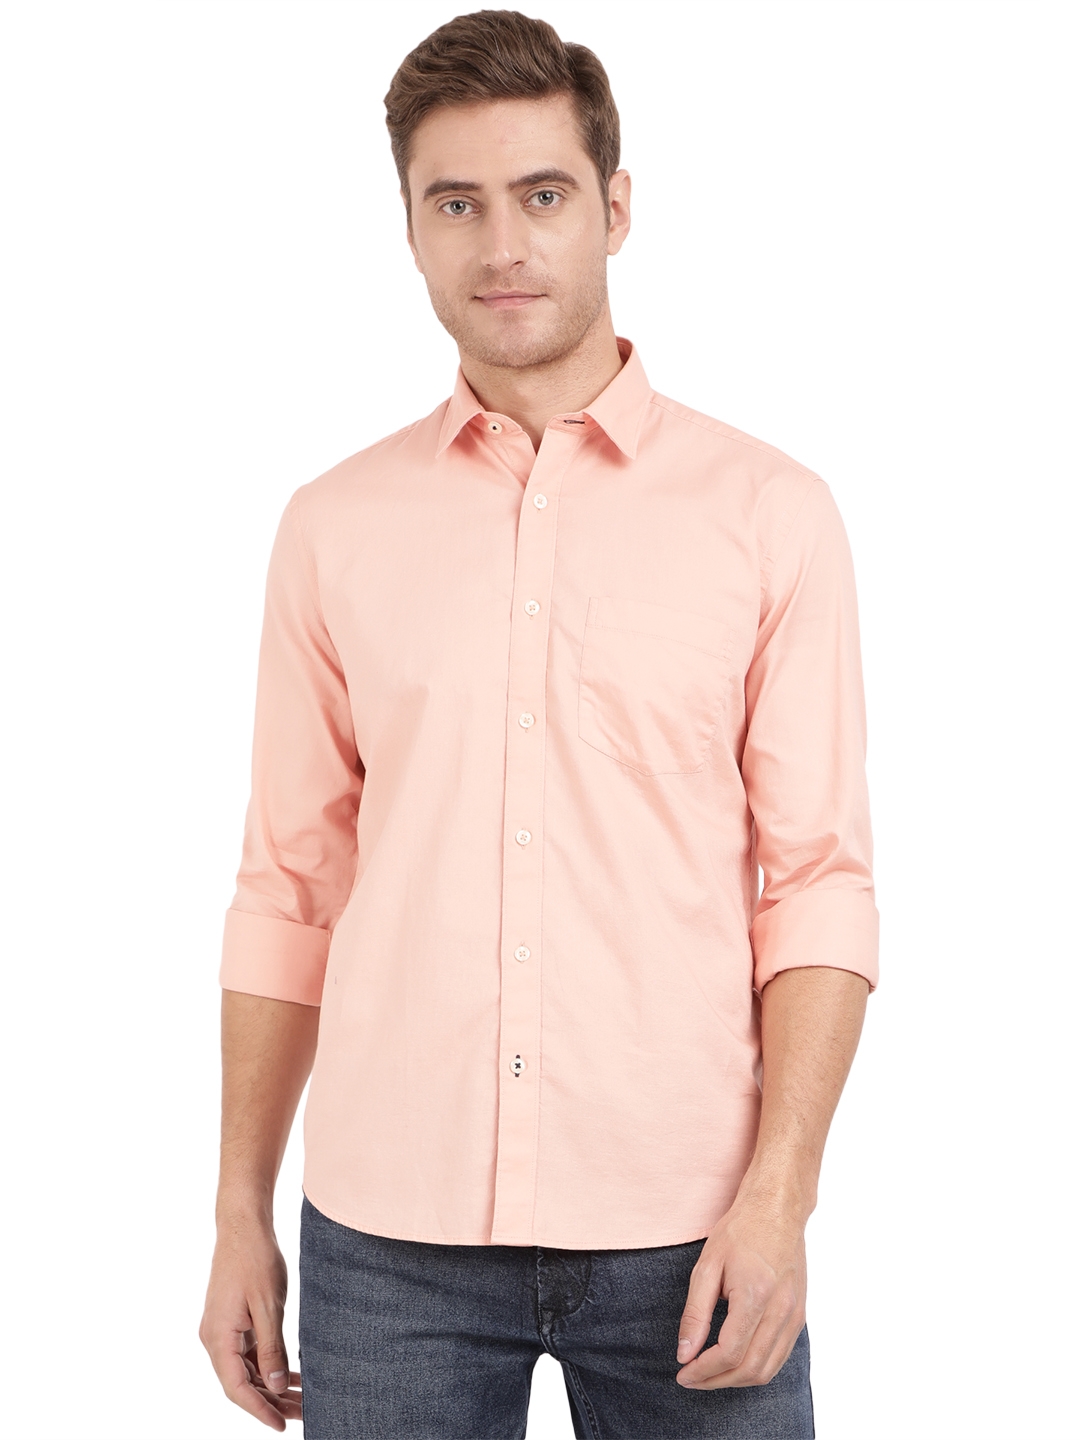 Greenfibre | Peach Solid Slim Fit Casual Shirt | Greenfibre